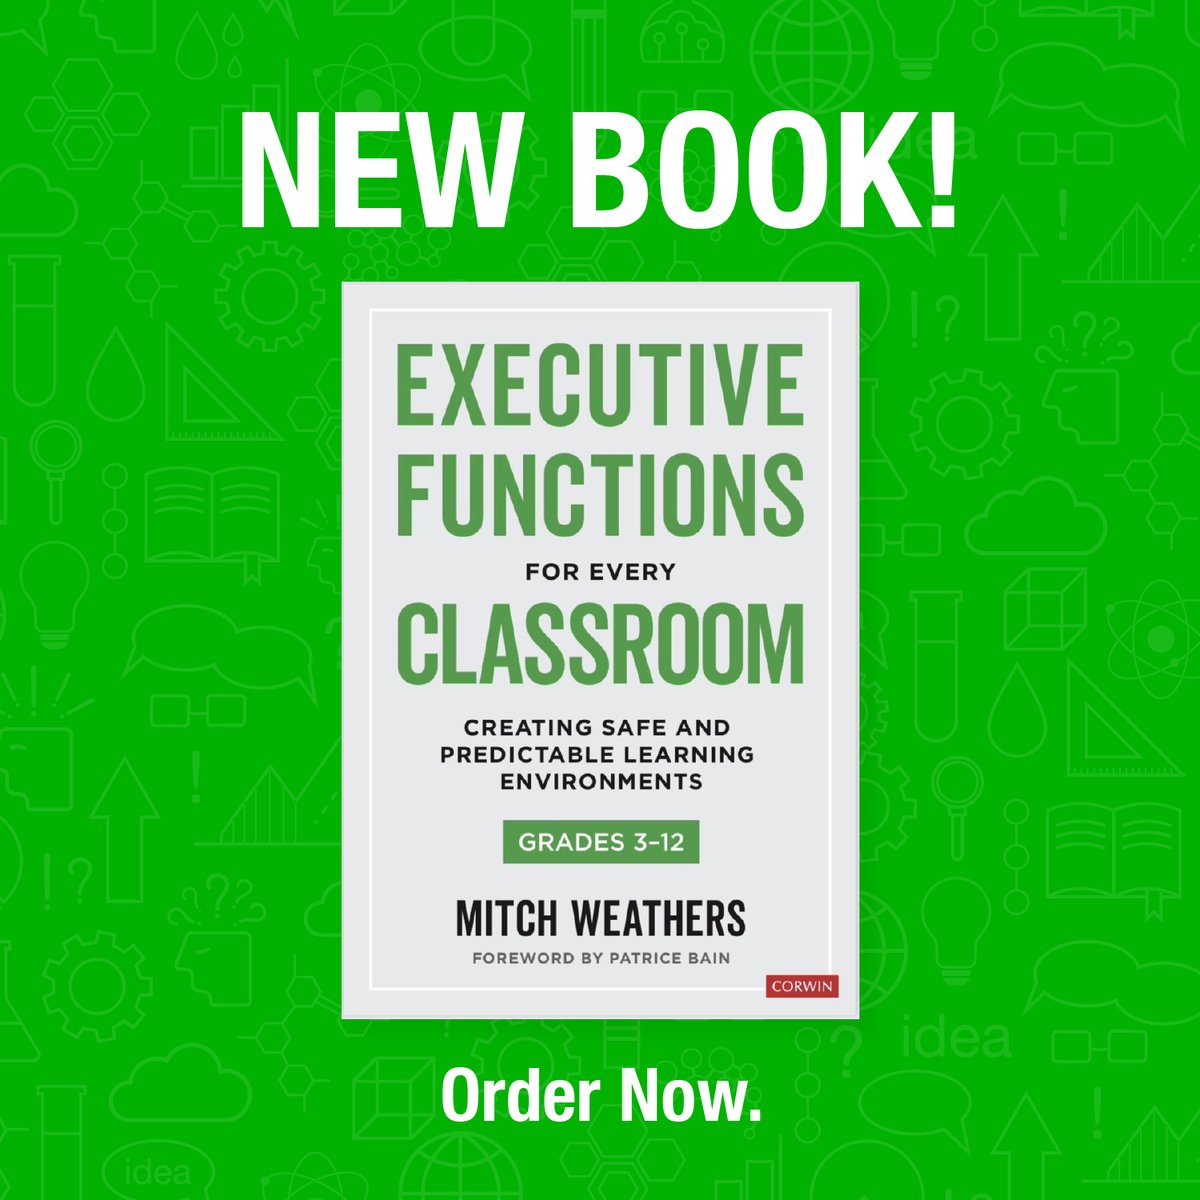 I am thrilled to share that you can now purchase my book Executive Functions for Every Classroom!

Grab your copy here: organizedbinder.com/book

Also available on Amazon!

#executivefunctioning #executivefunctioningskills #executivefunction #executivefunctionskills